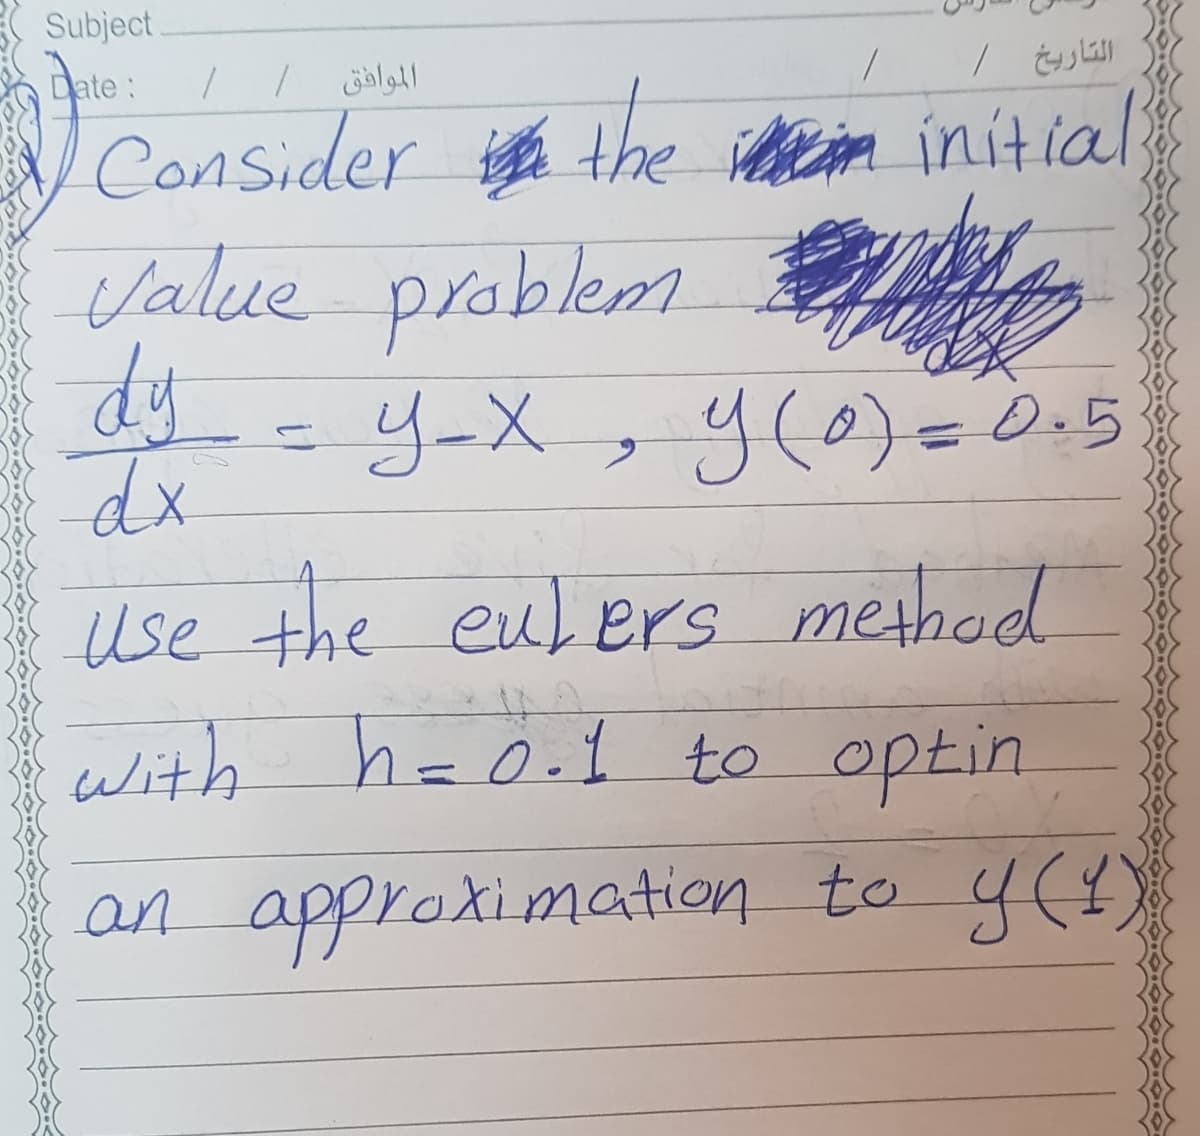 Subject
Date:
الموافق
N Consider the ietiom initial
Value problemm
dy
y-X
y(0)=0.5
dx
use the eulers method
with haO.1 to optin
h=0.1
an approximation to y()
